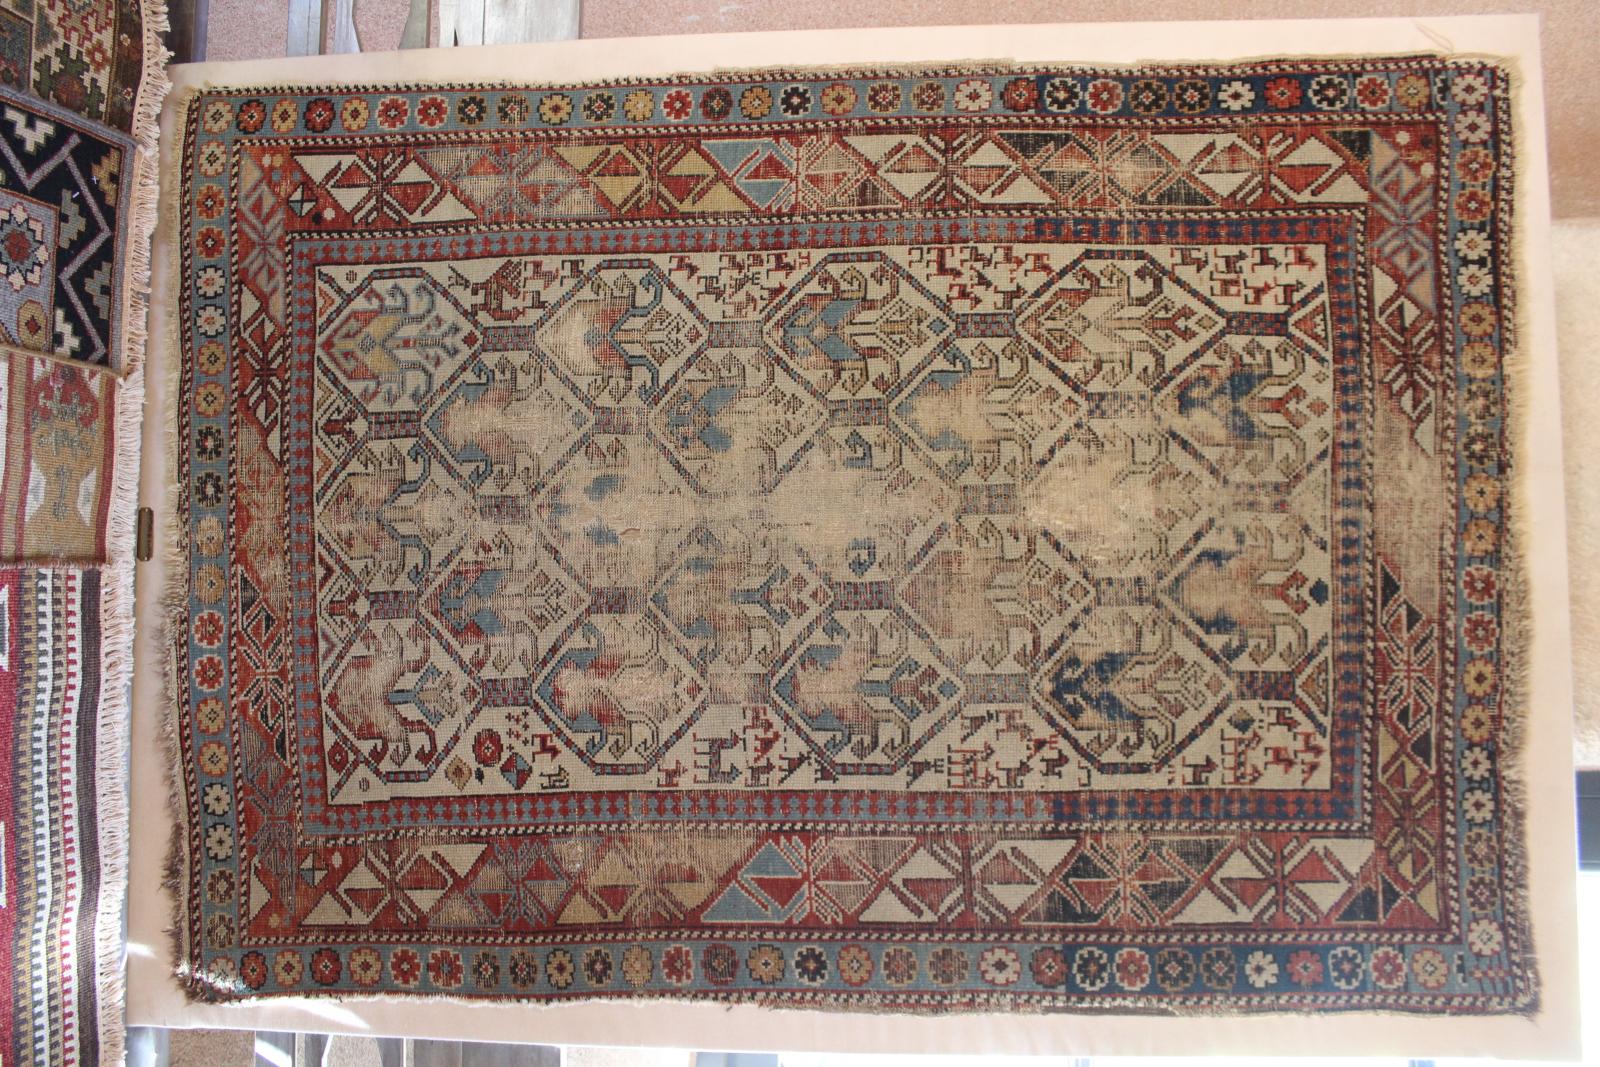 Prescott Valley Rug Cleaning. Move Home With Clean Rugs